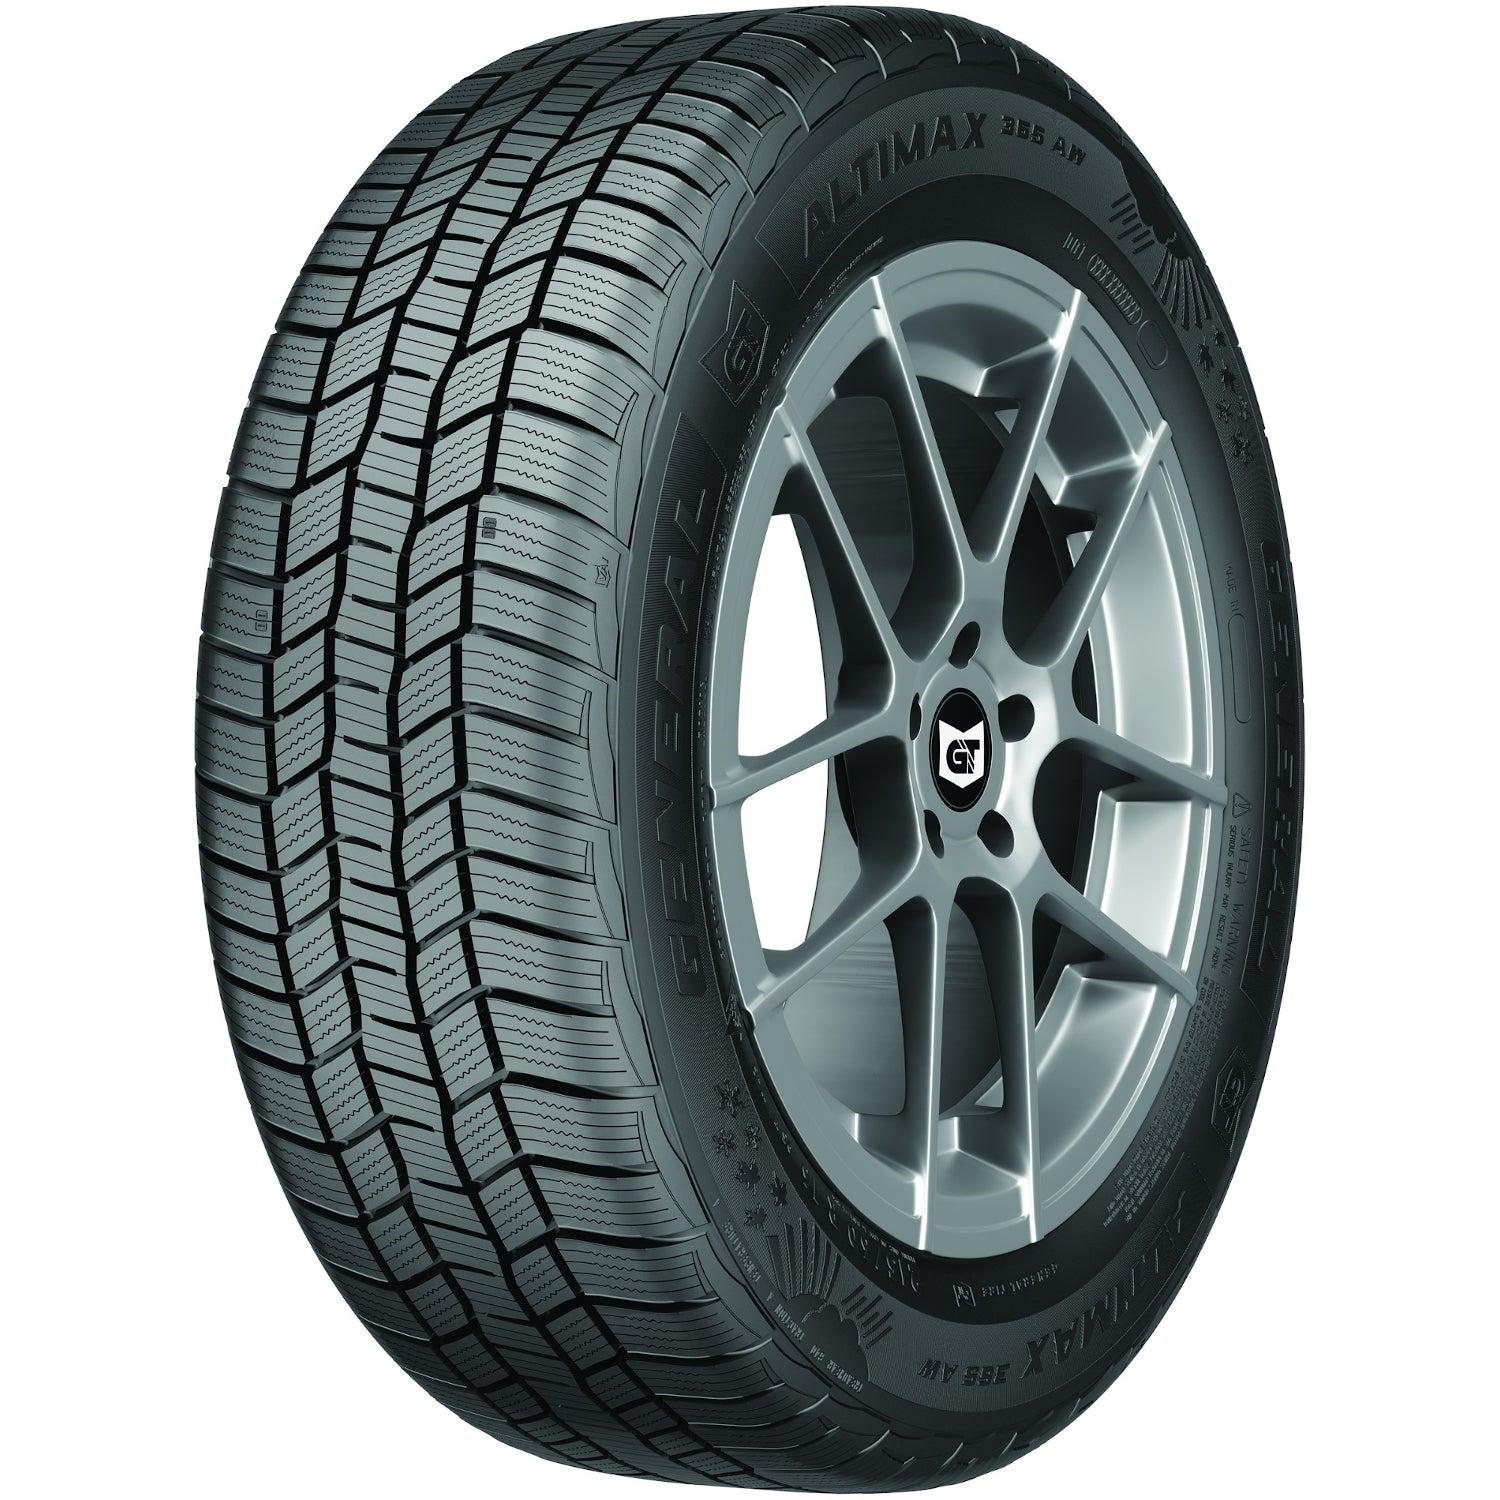 GENERAL ALTIMAX 365AW 215/50R17 (25.5X8.5R 17) Tires